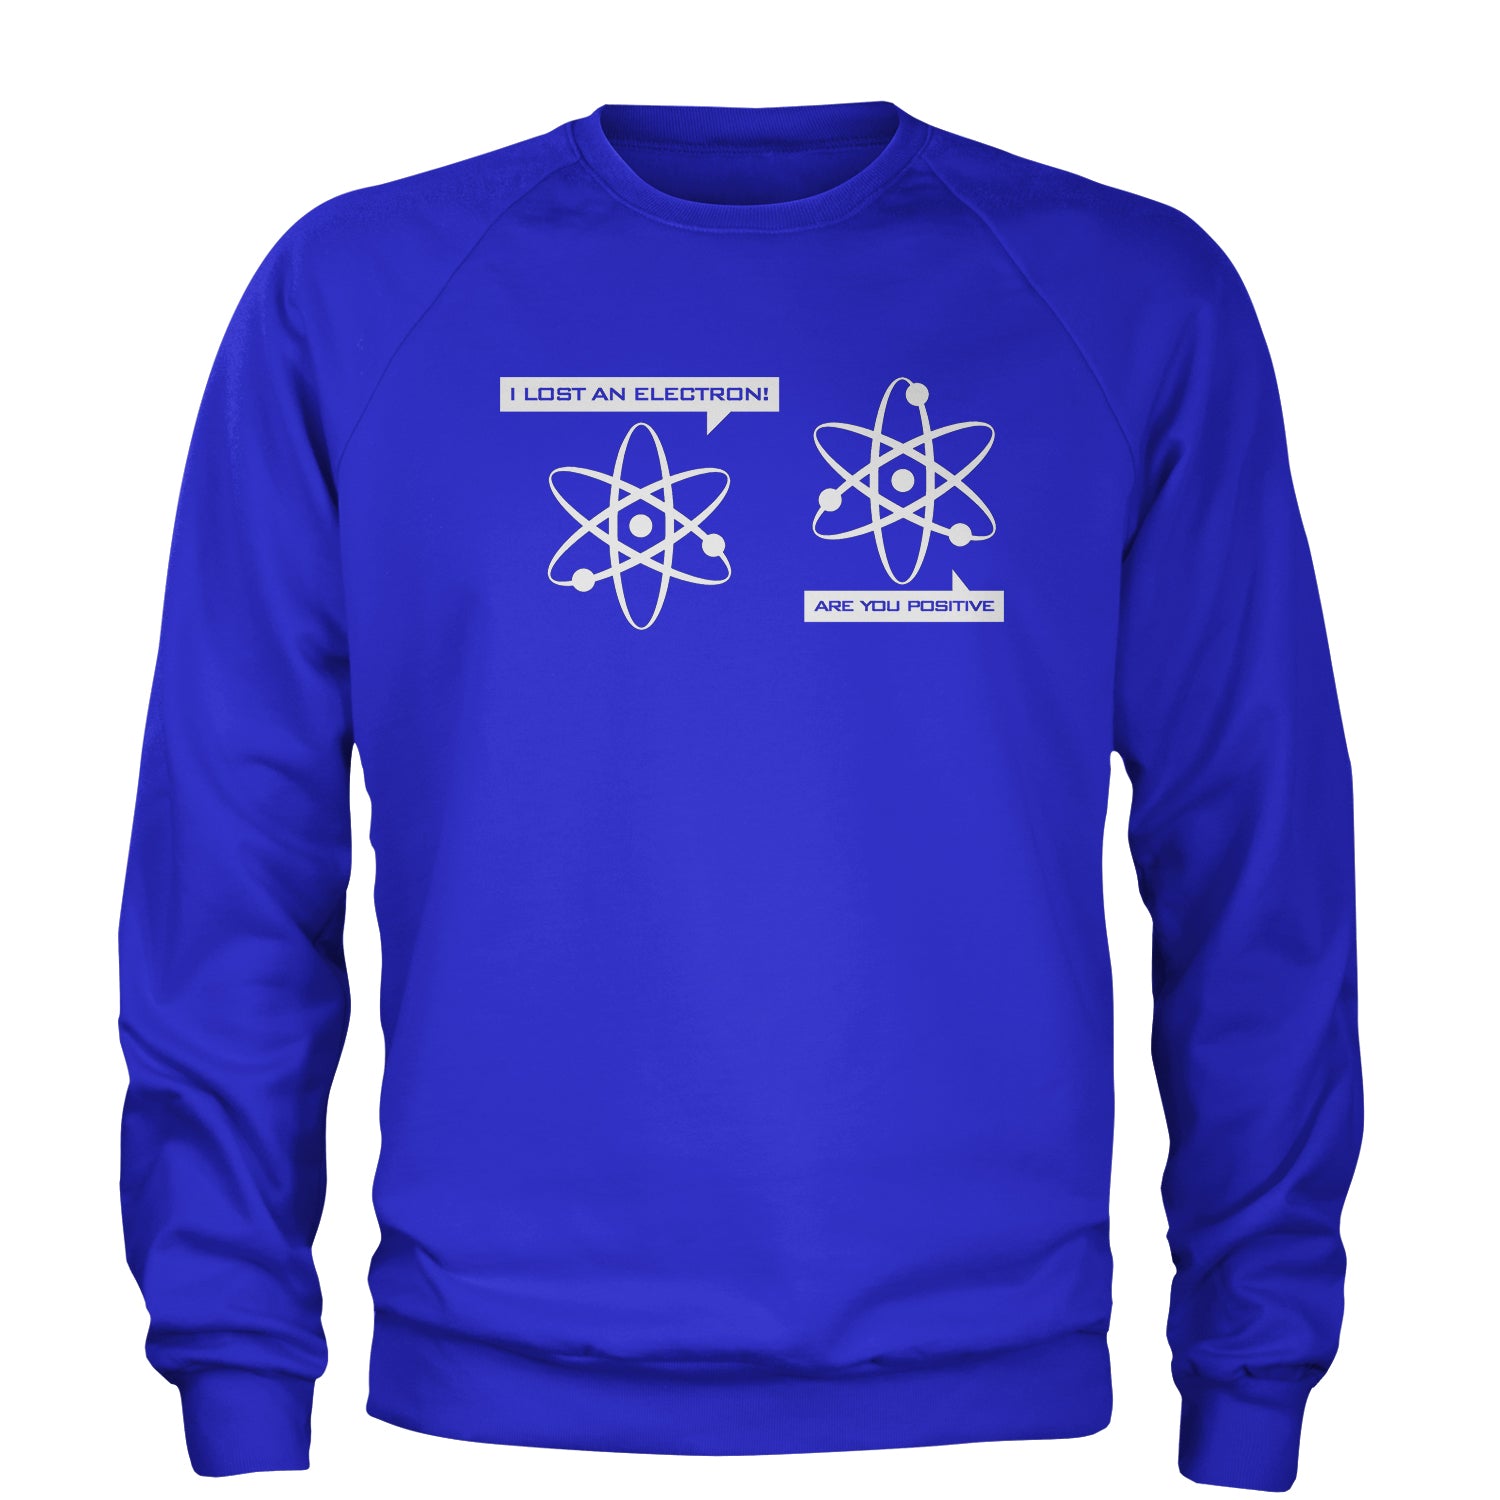 I Lost An Electron Funny Physics Adult Crewneck Sweatshirt an, are, chemistry, clothing, electron, funny, I, lost, physics, positive, this, thiswear, wear, you by Expression Tees